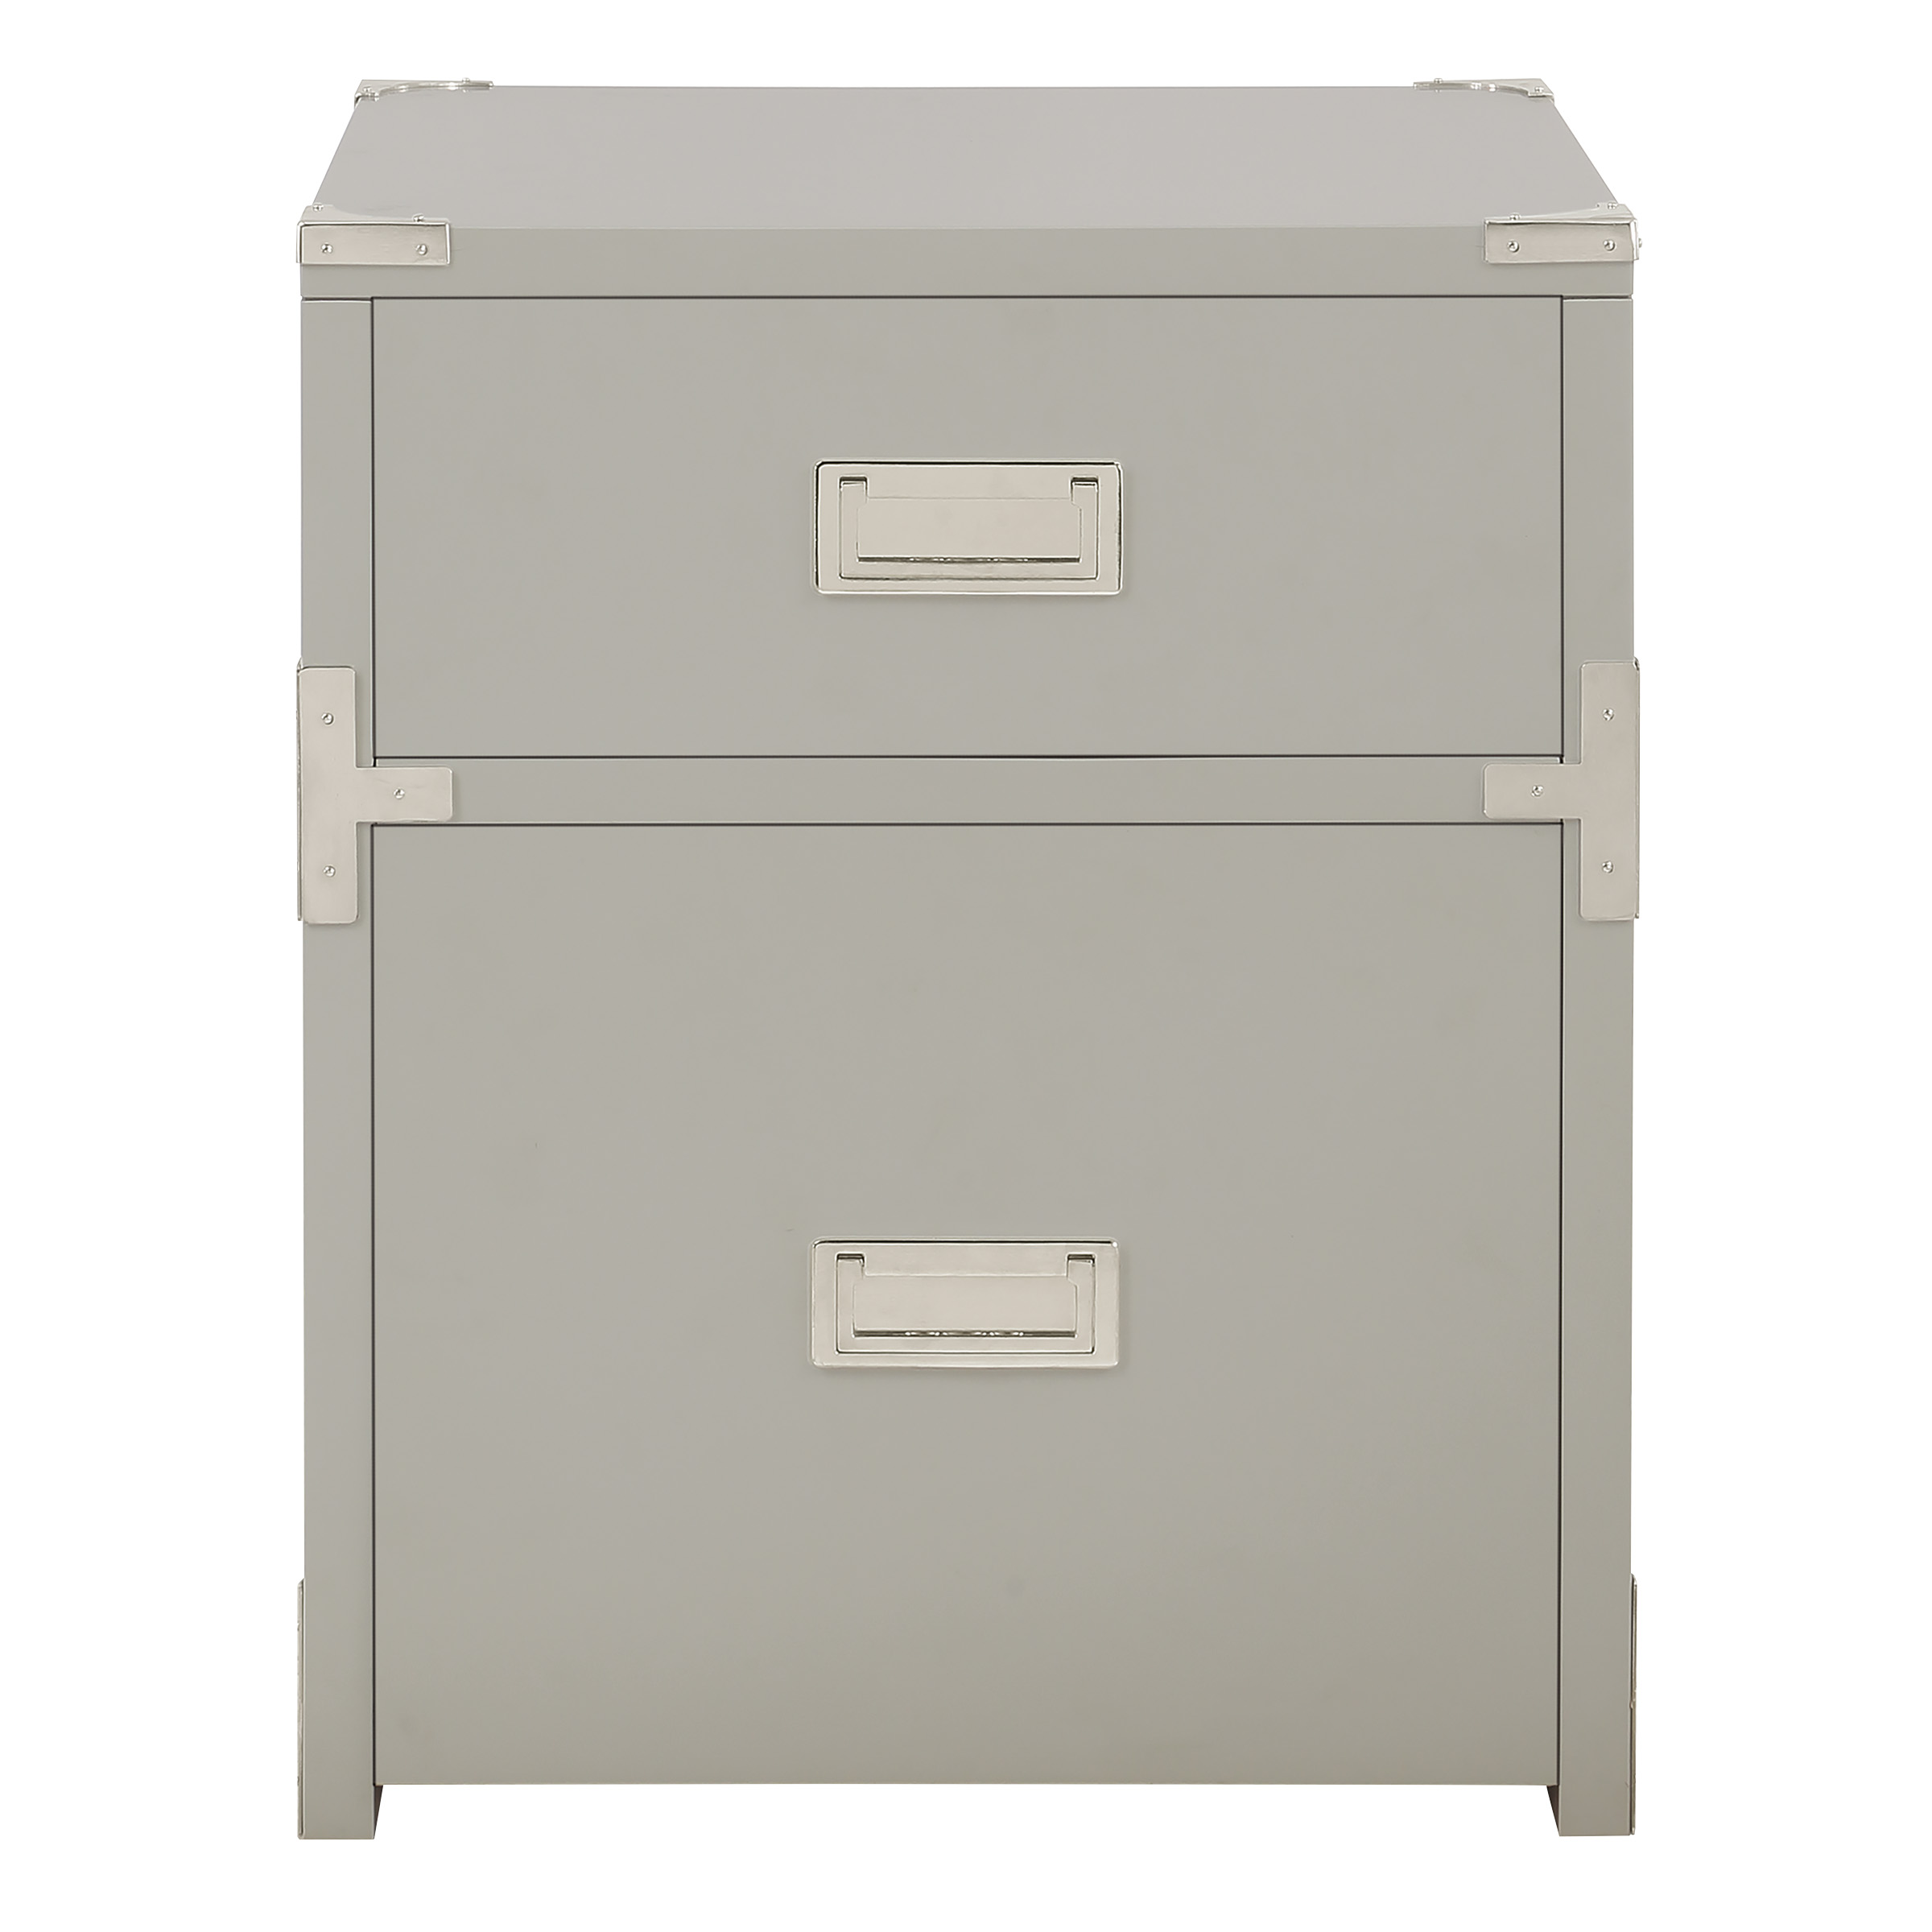 Wellington 2 Drawer Engineered Wood File Cabinet in Gray - image 5 of 8